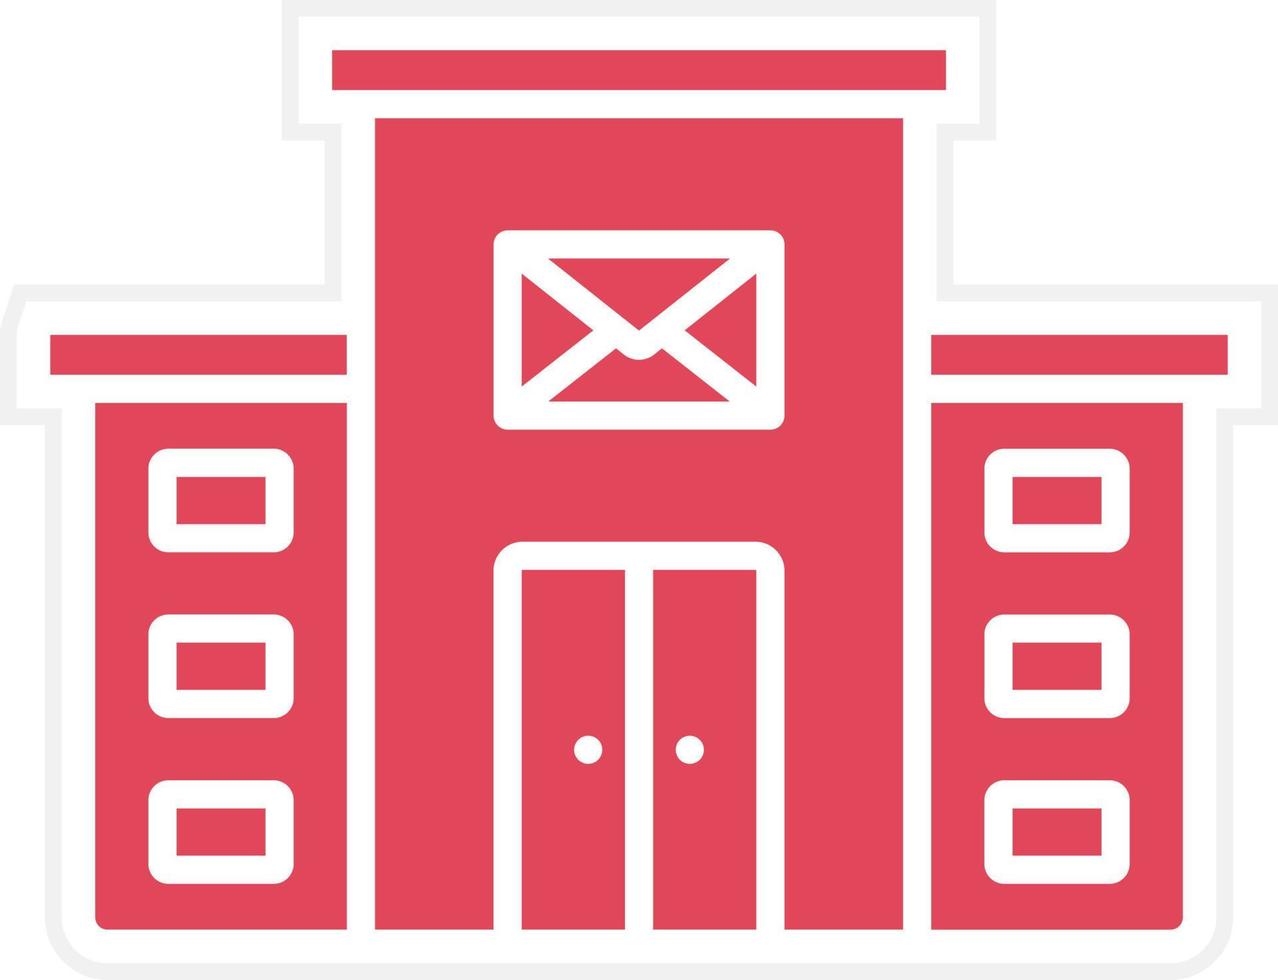 Post Office Building Icon Style vector